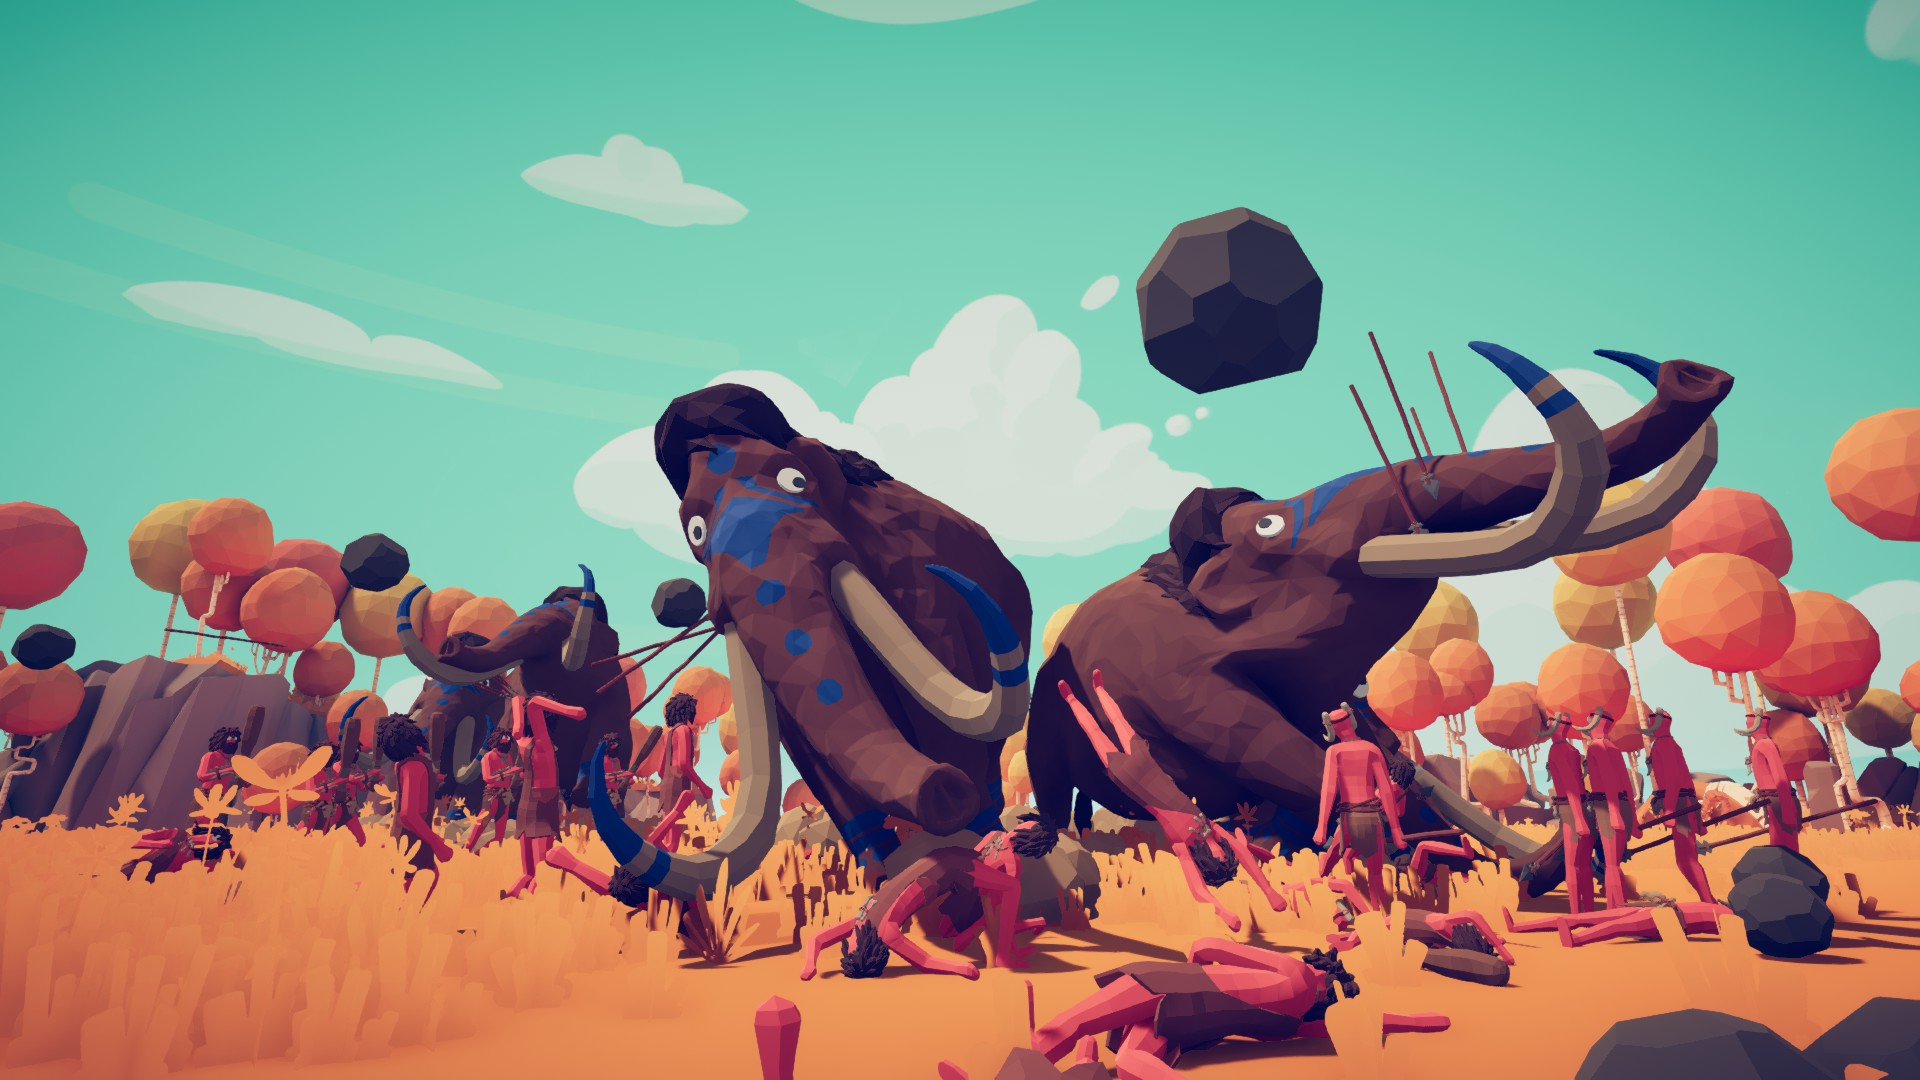 Find the best computers for Totally Accurate Battle Simulator